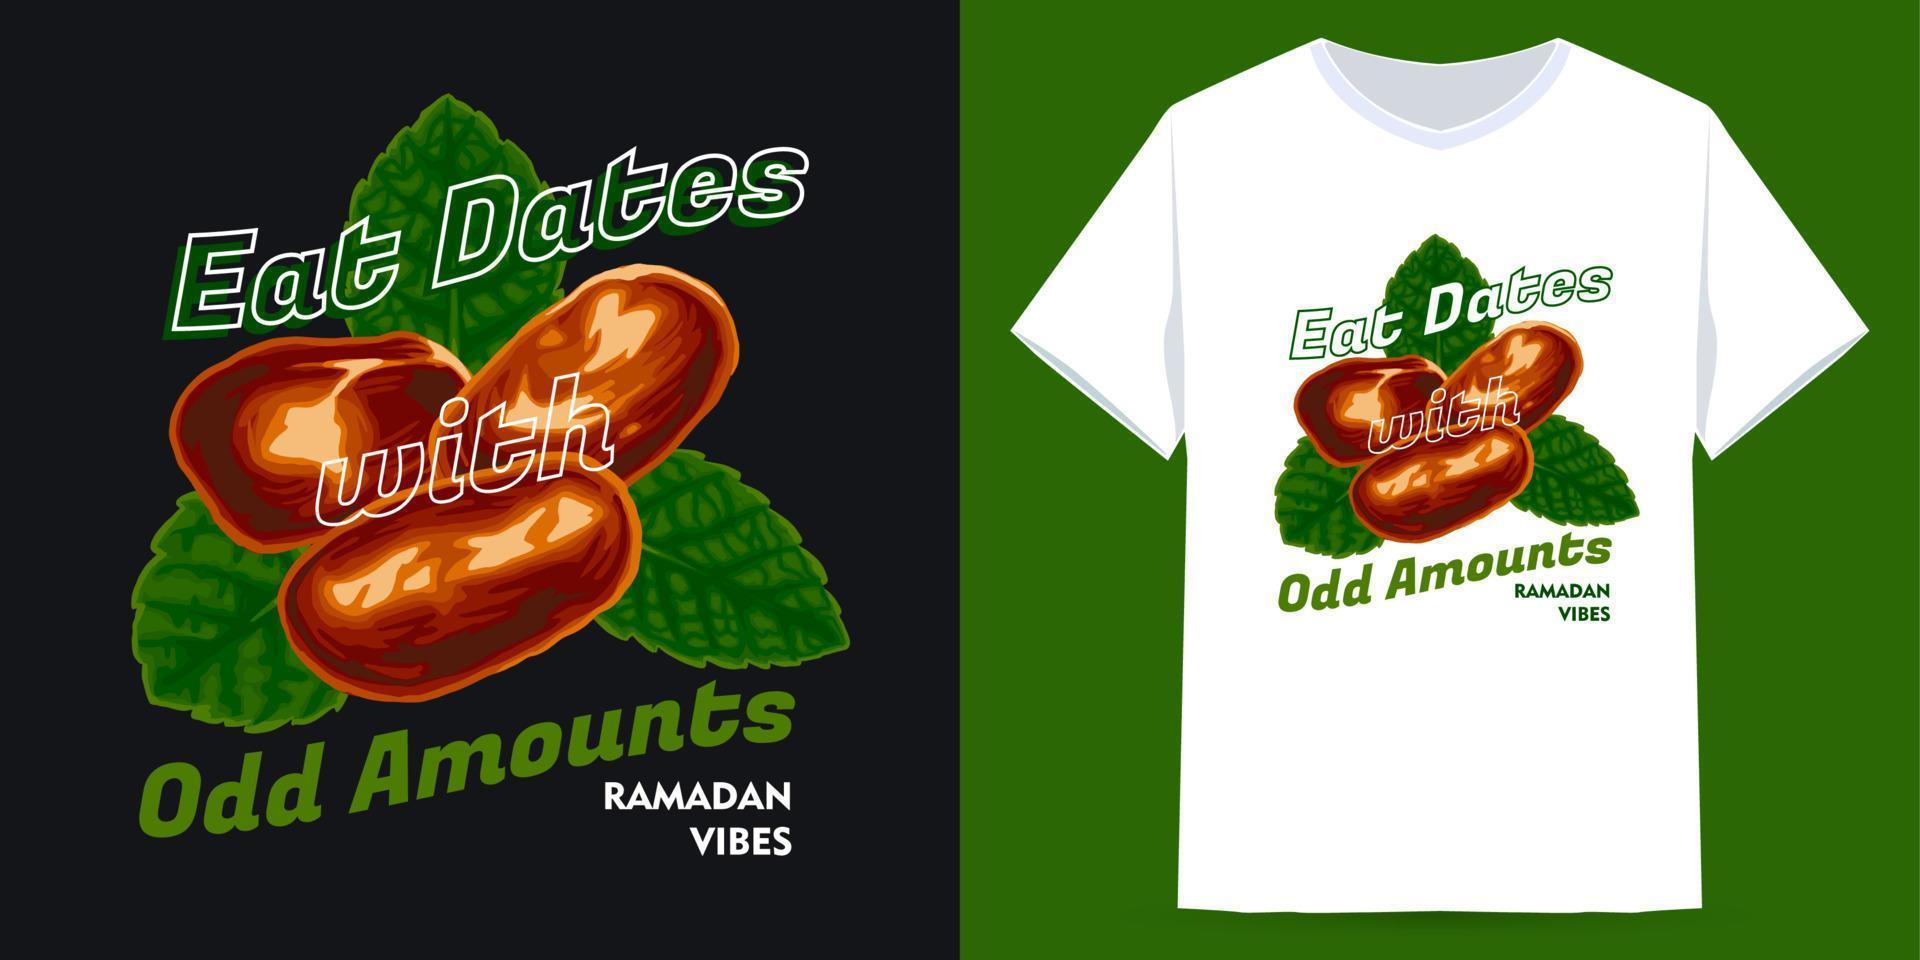 Eating Dates With Odd Amounts Suitable for Ramadan Vibes vector